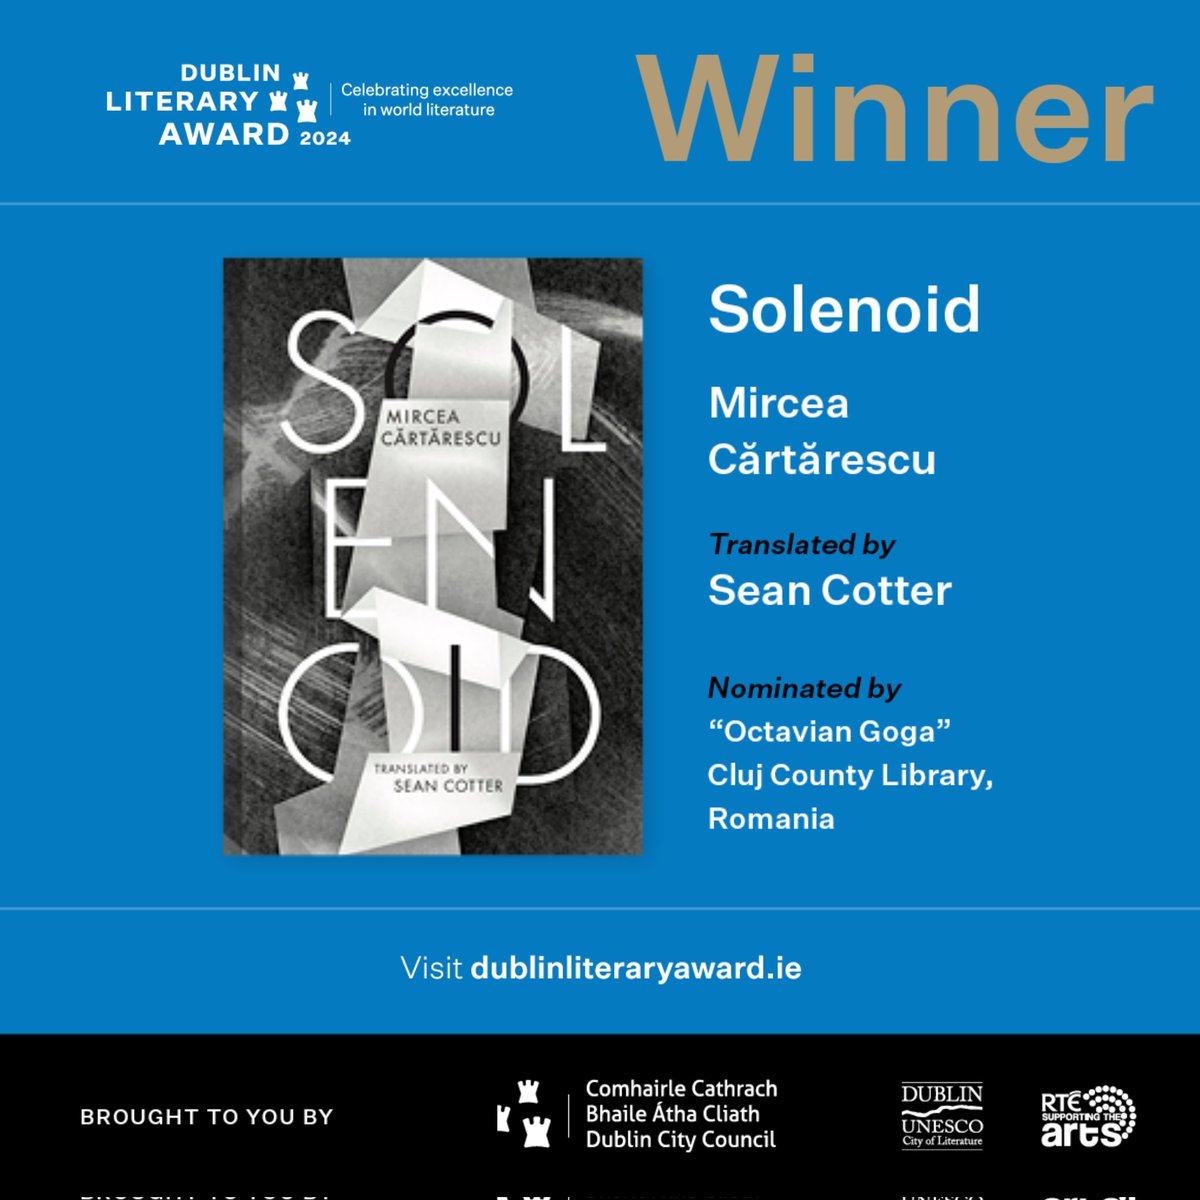 Romanian author Mircea Cărtărescu and American translator Sean Cotter have won the @DublinLitAward for the novel Solenoid, congratulations both! Here at #AUParis we're also proud that this year's esteemed judging panel included professor Daniel Medin loom.ly/vuQdSy0